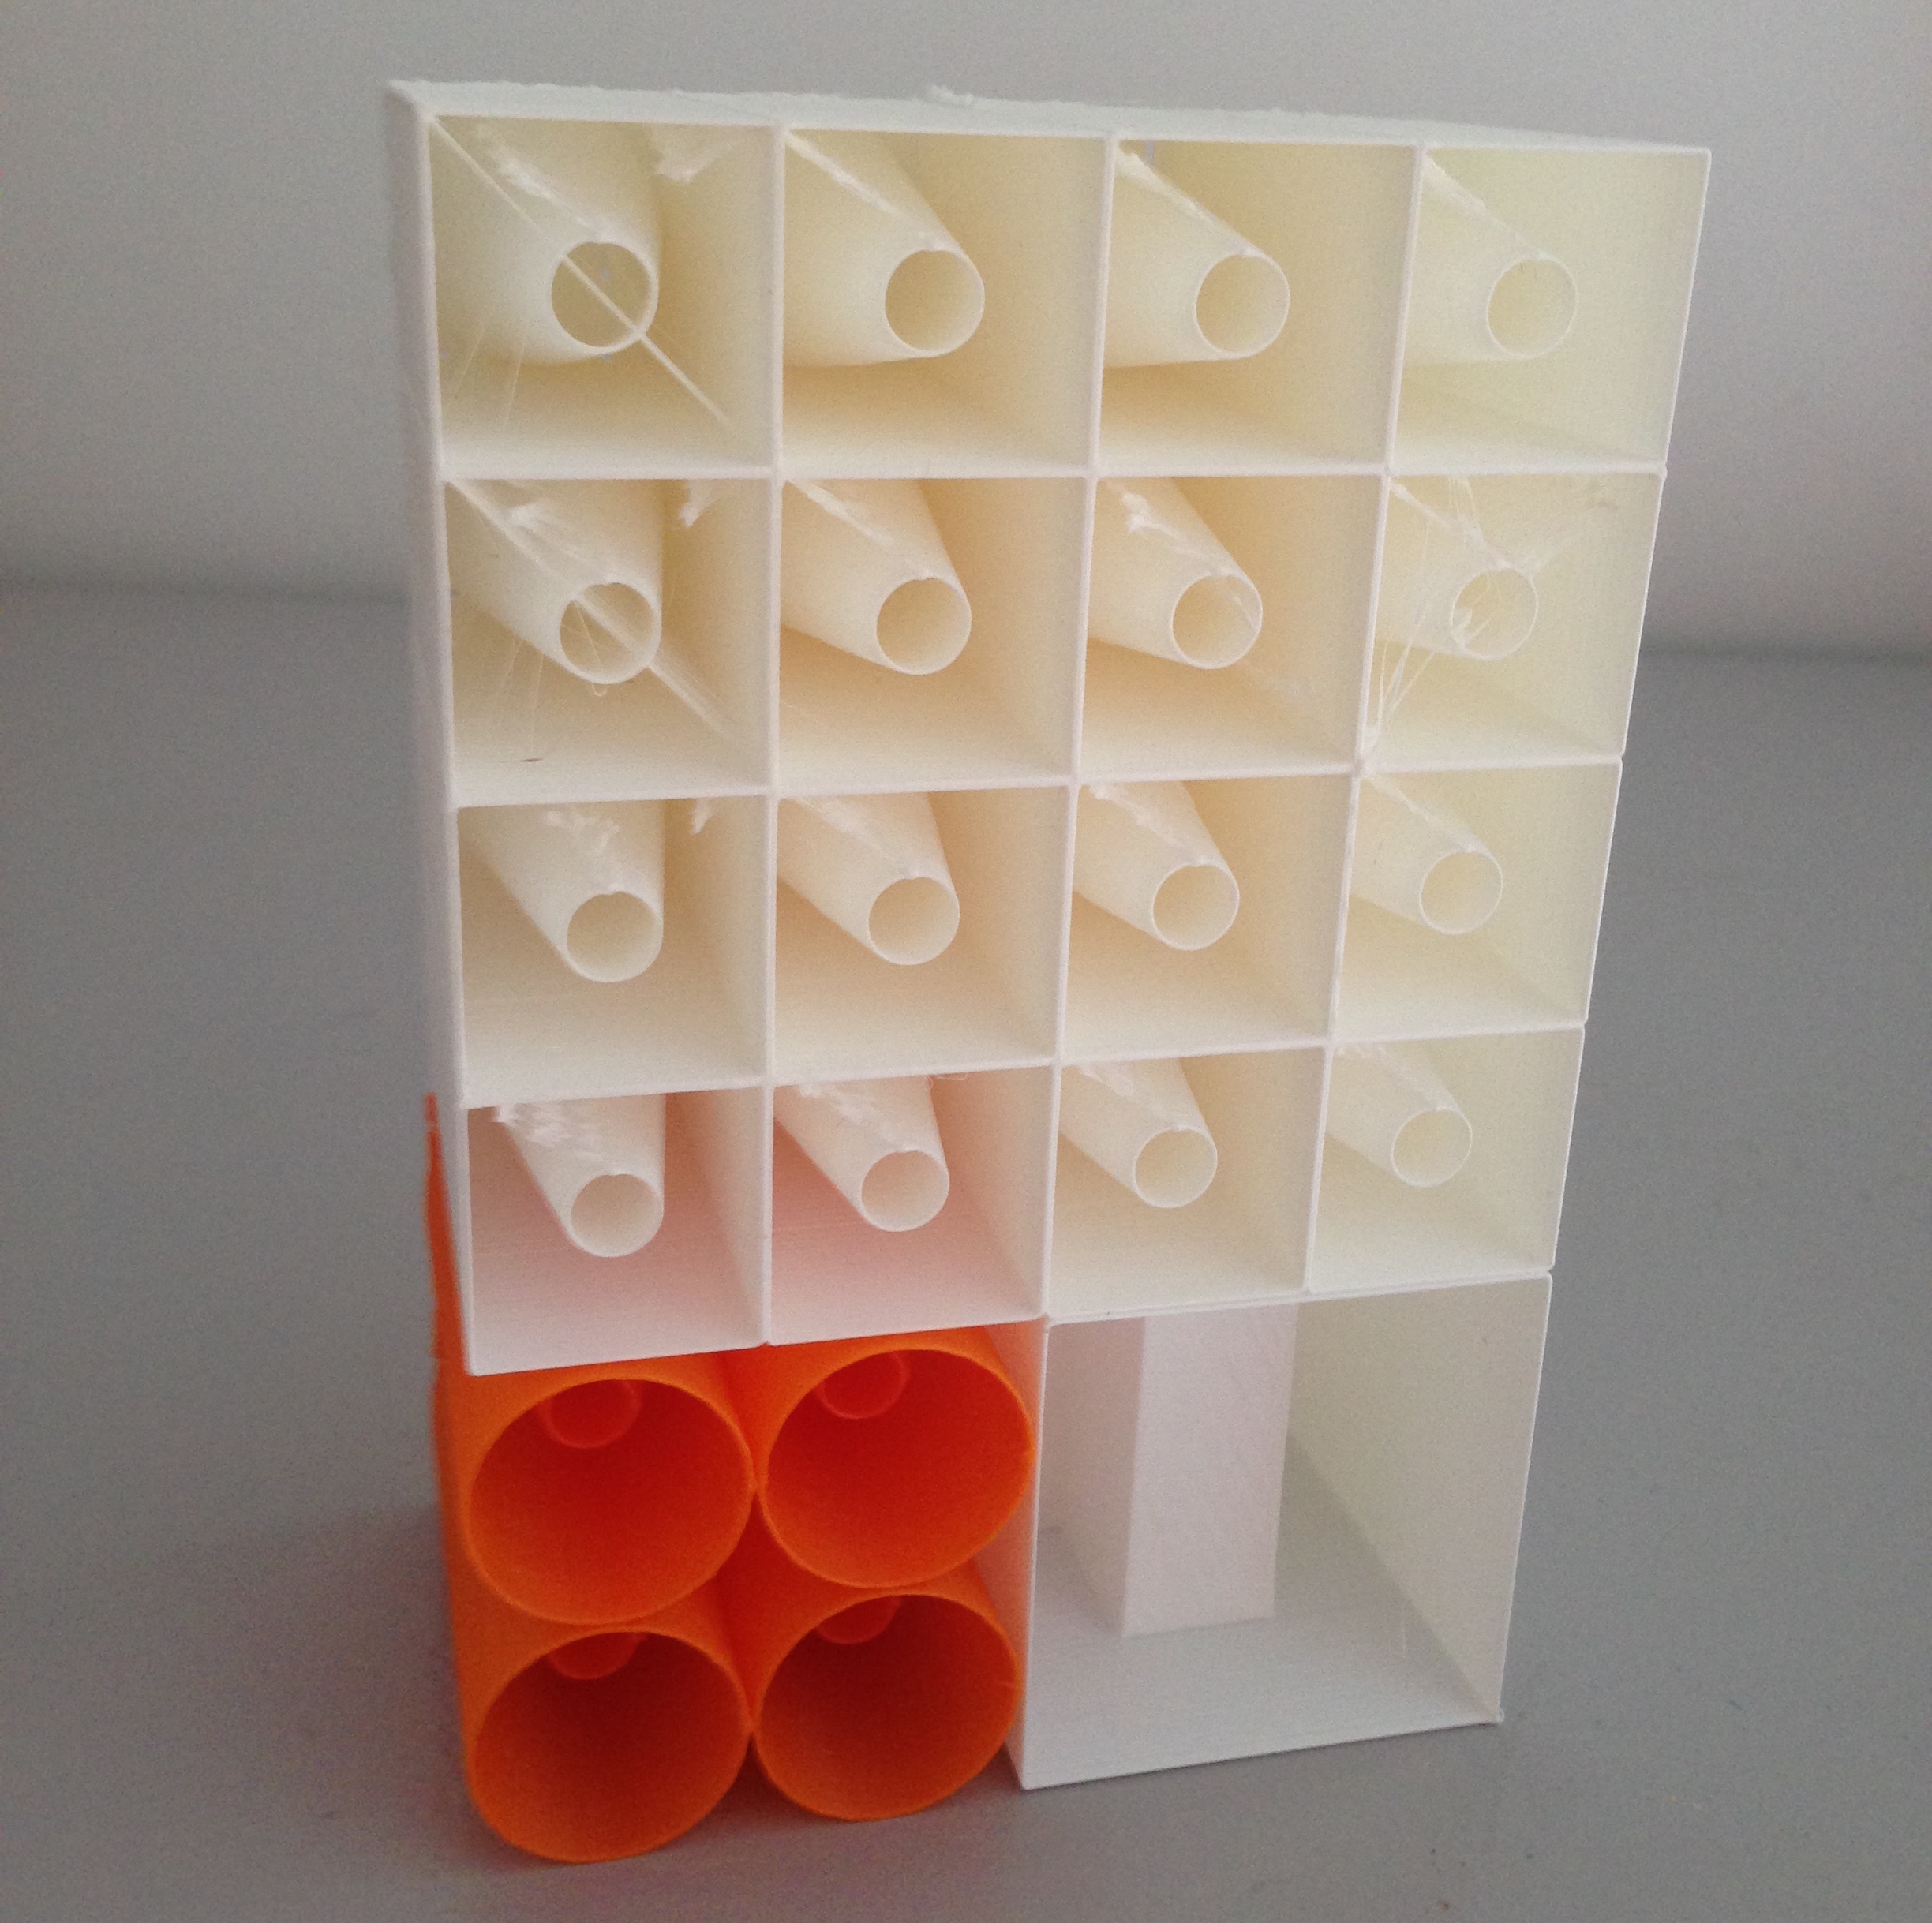  A 3D printed sound absorbing system 